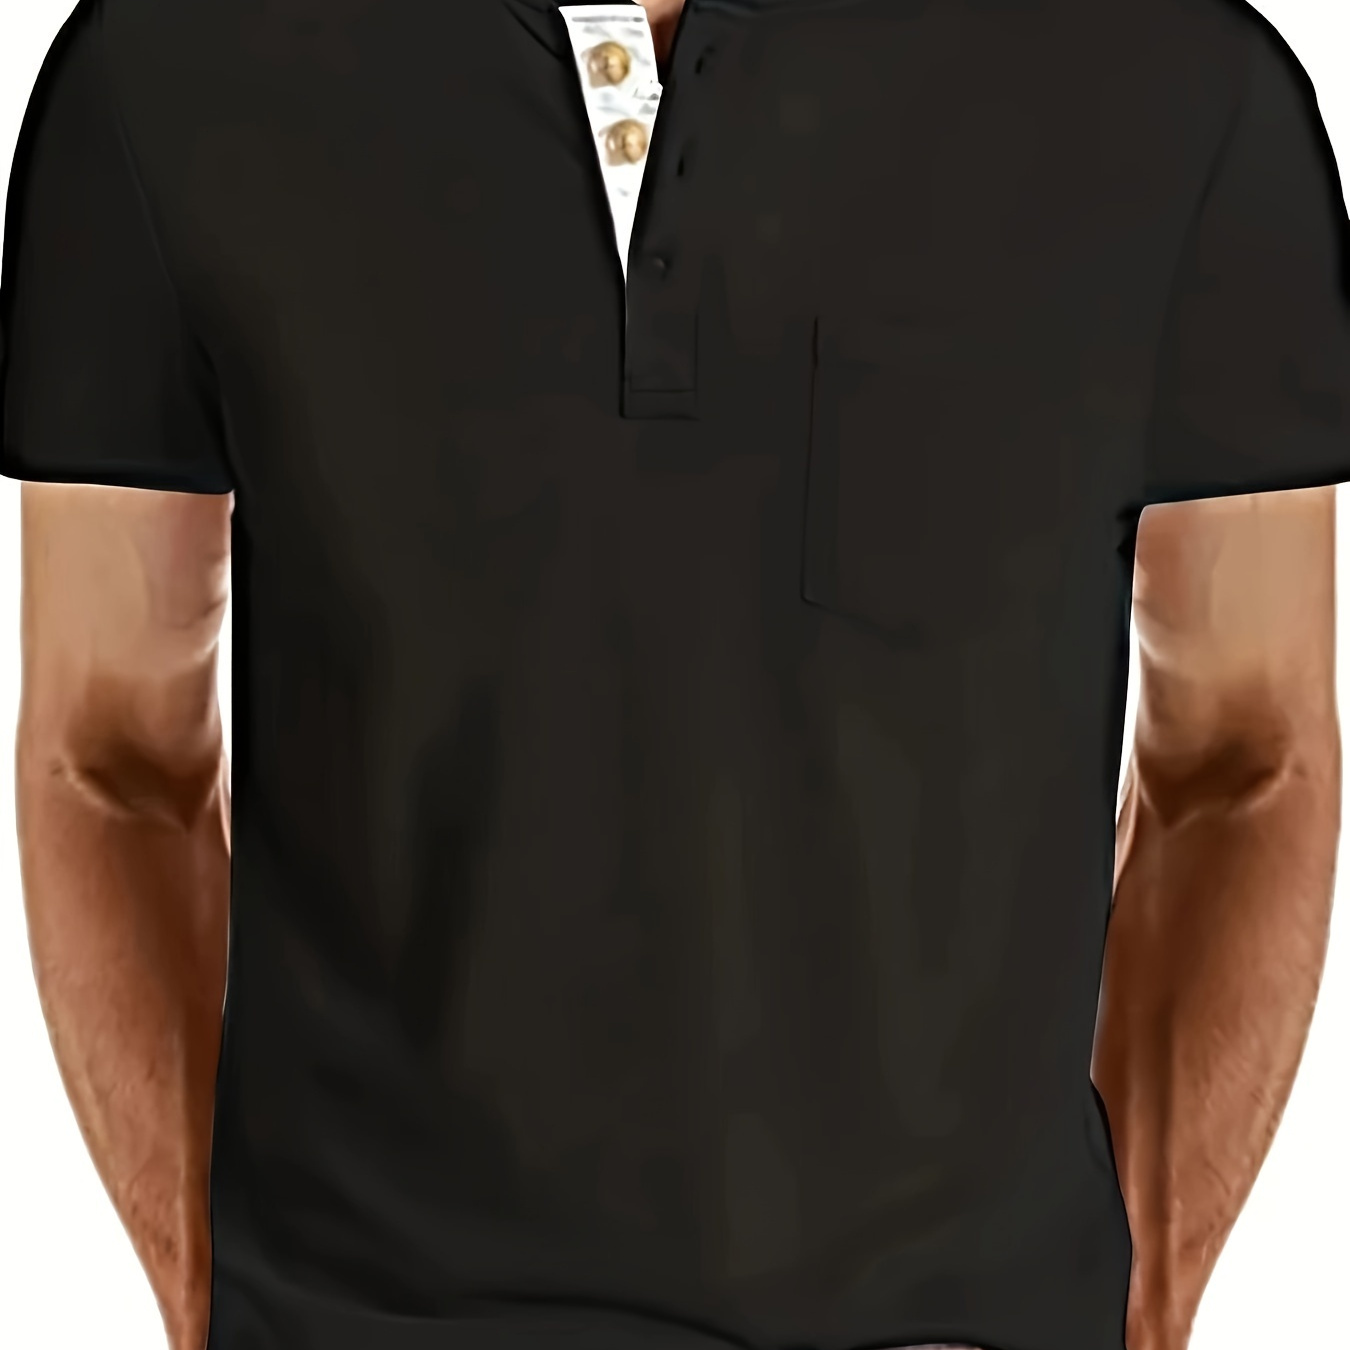 

Men's Stylish Chest Pocket Henley Tee - A Must-have Casual Slim Short Sleeve T-shirt For Summer!